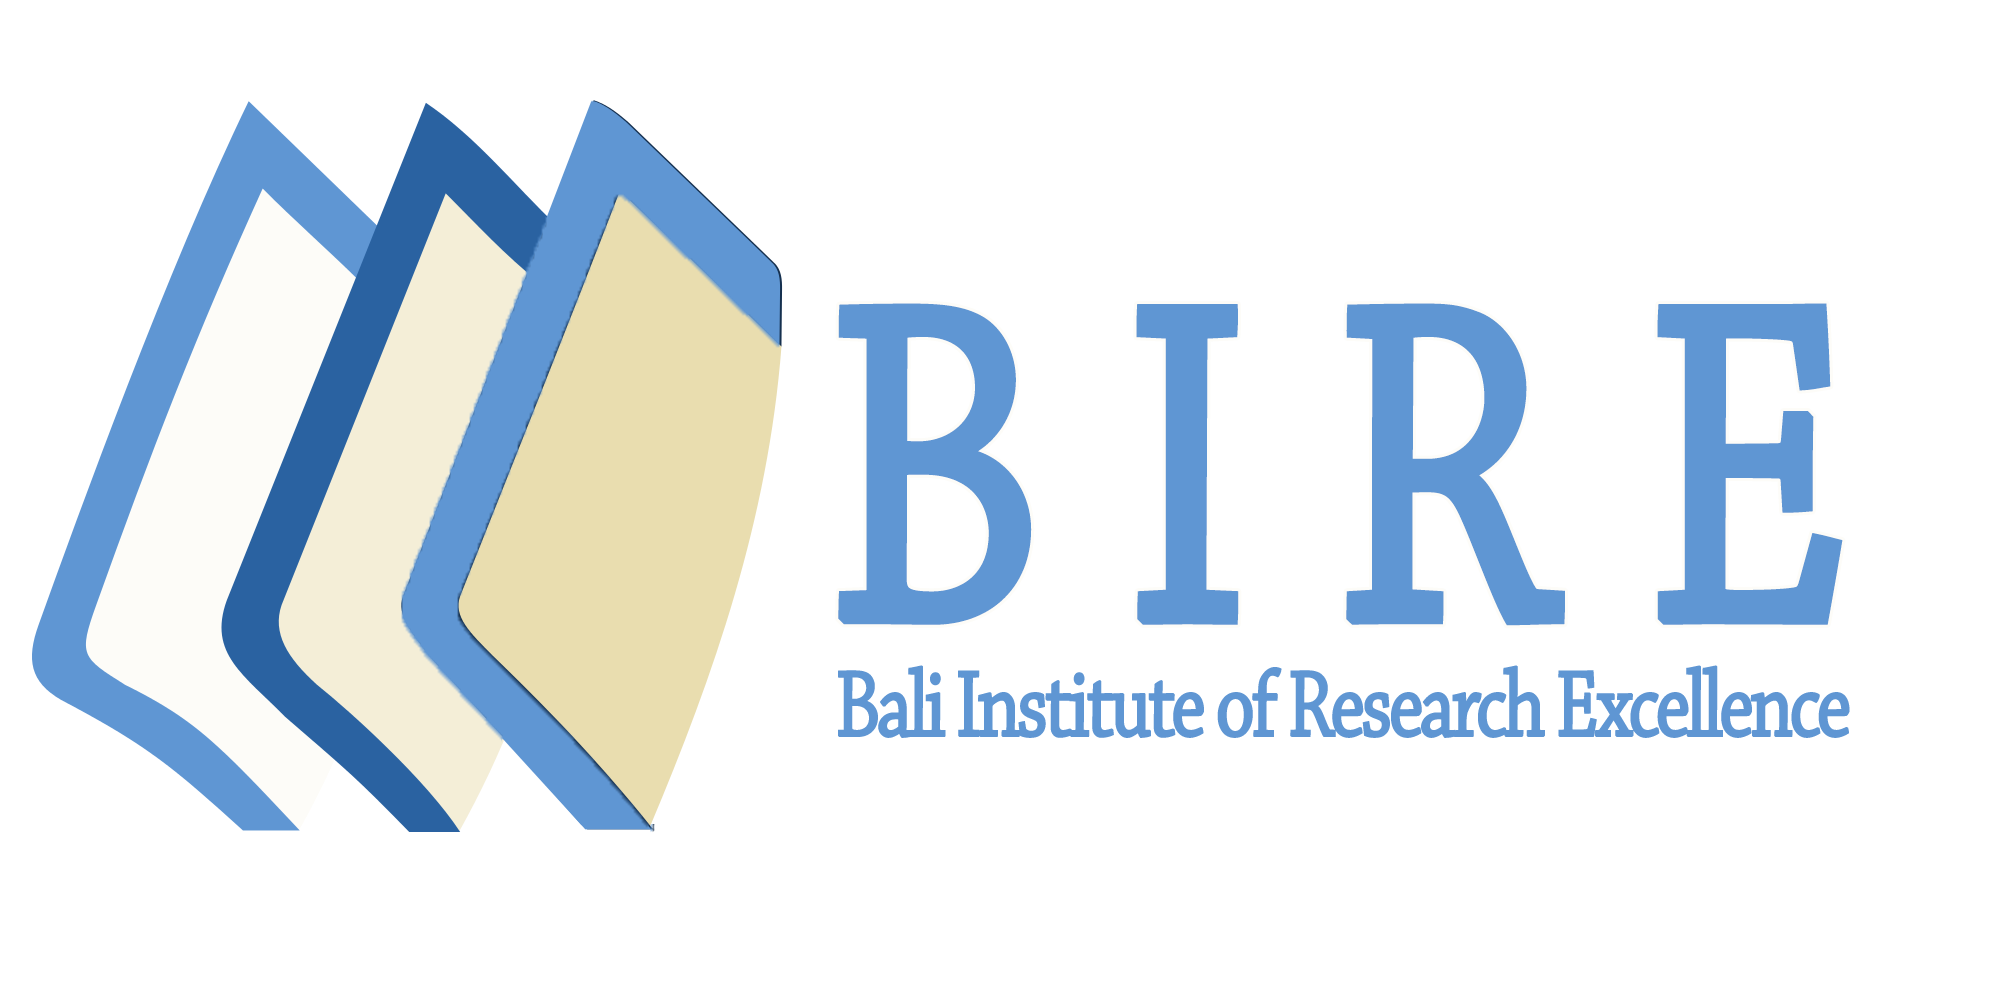 RBSEIT-2023 2023 International Conference on Current Research in Business Management, Social Sciences, Economics and Information Technology, Bali, Indonesia